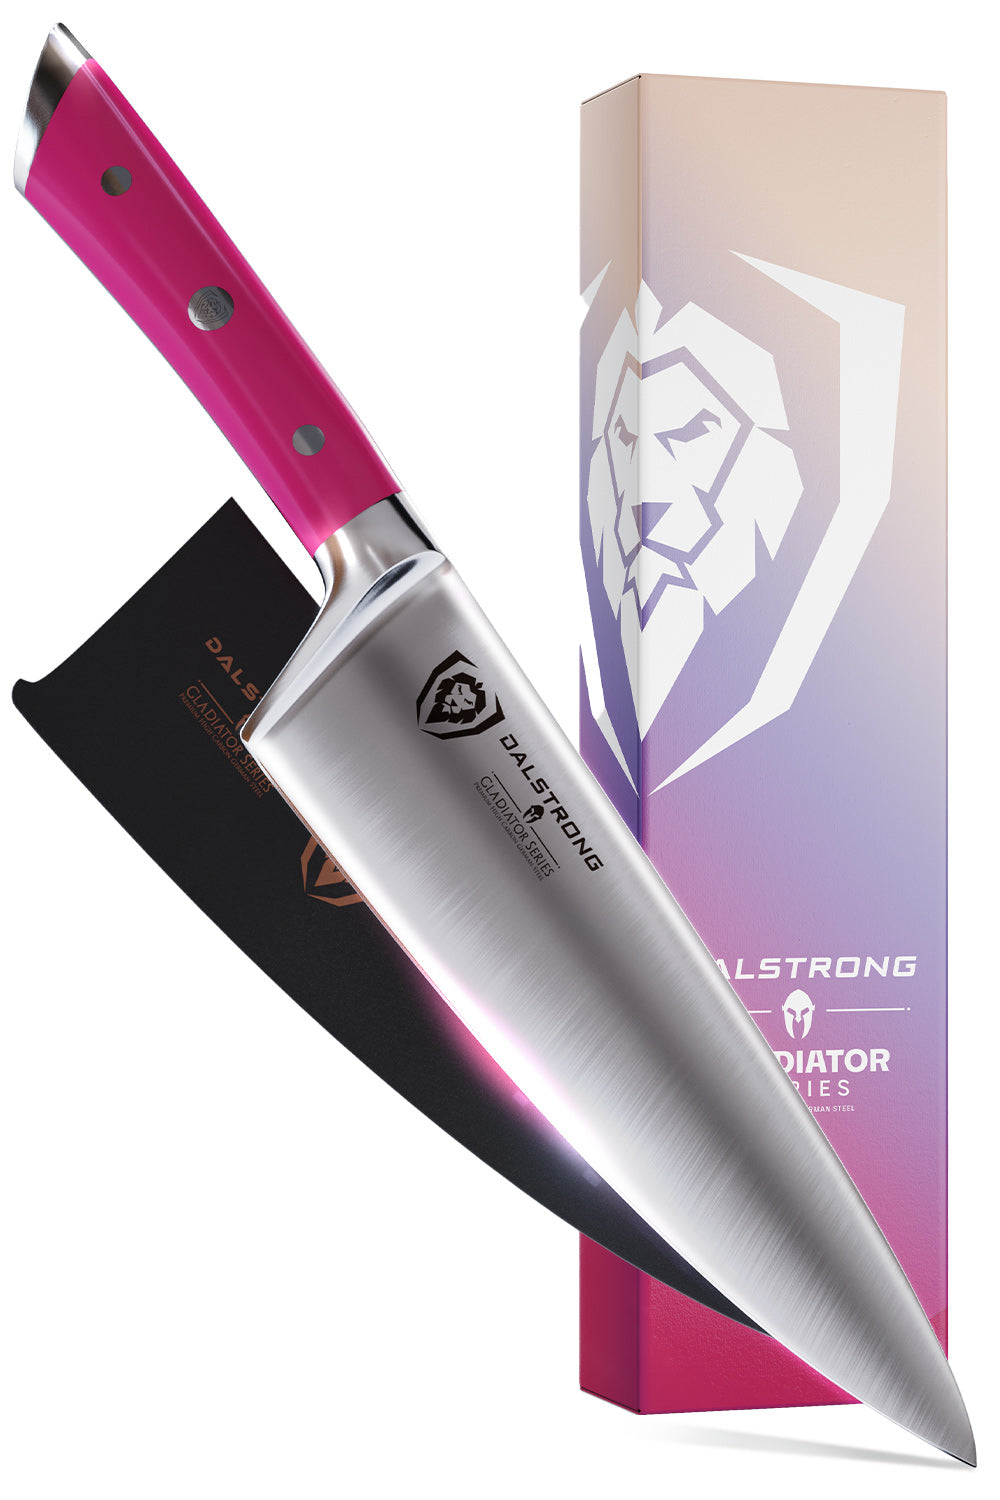 Dalstrong gladiator series 8 inch chef knife with fushia handle in front of it's premium packaging.